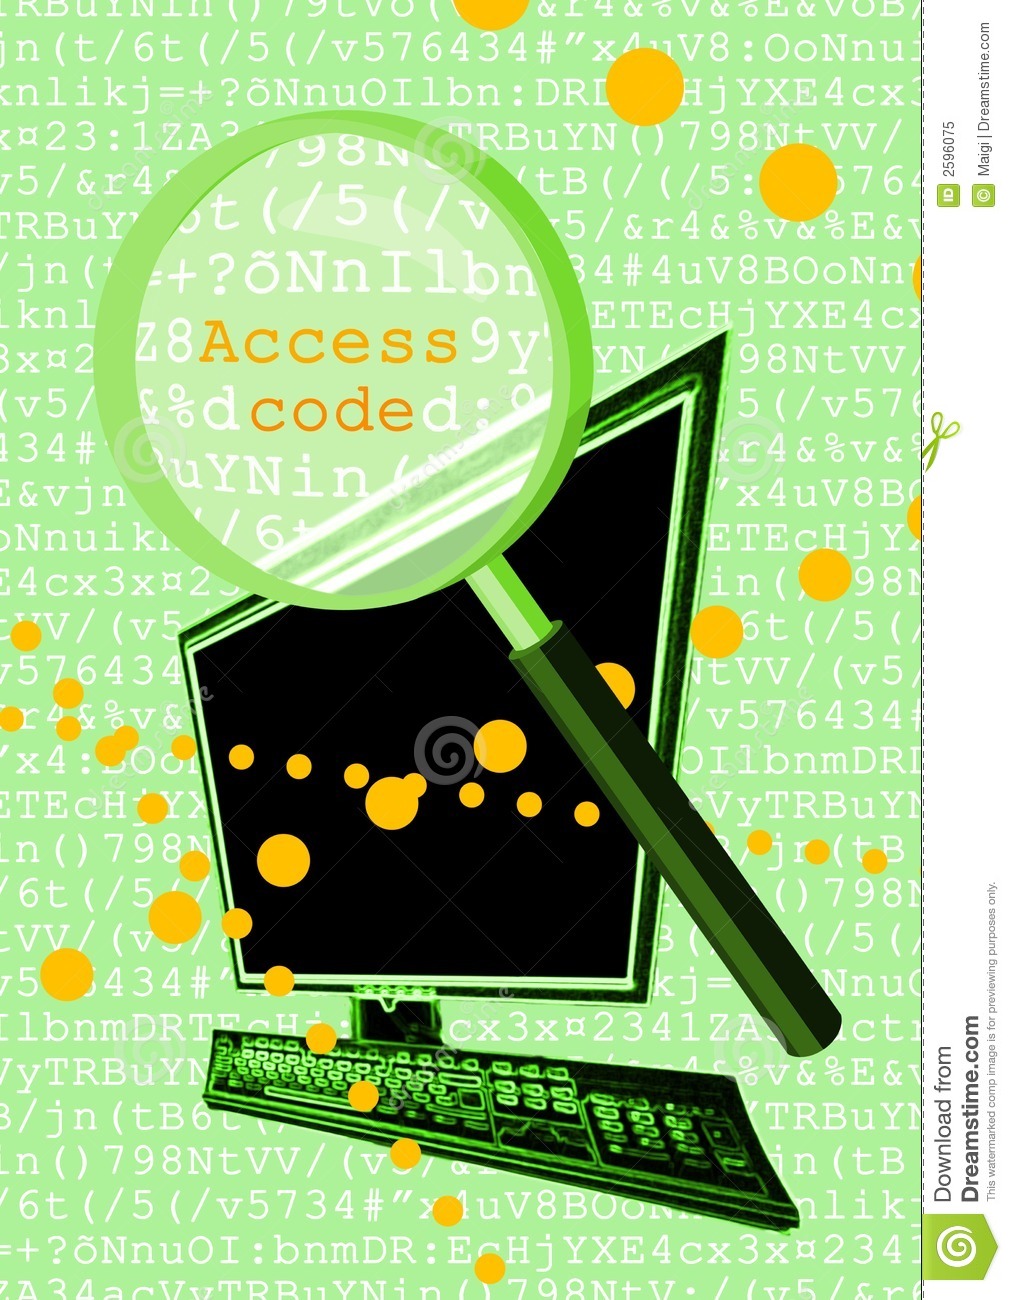 Access Code Clipart Royalty Free Stock Photo   Image  2596075